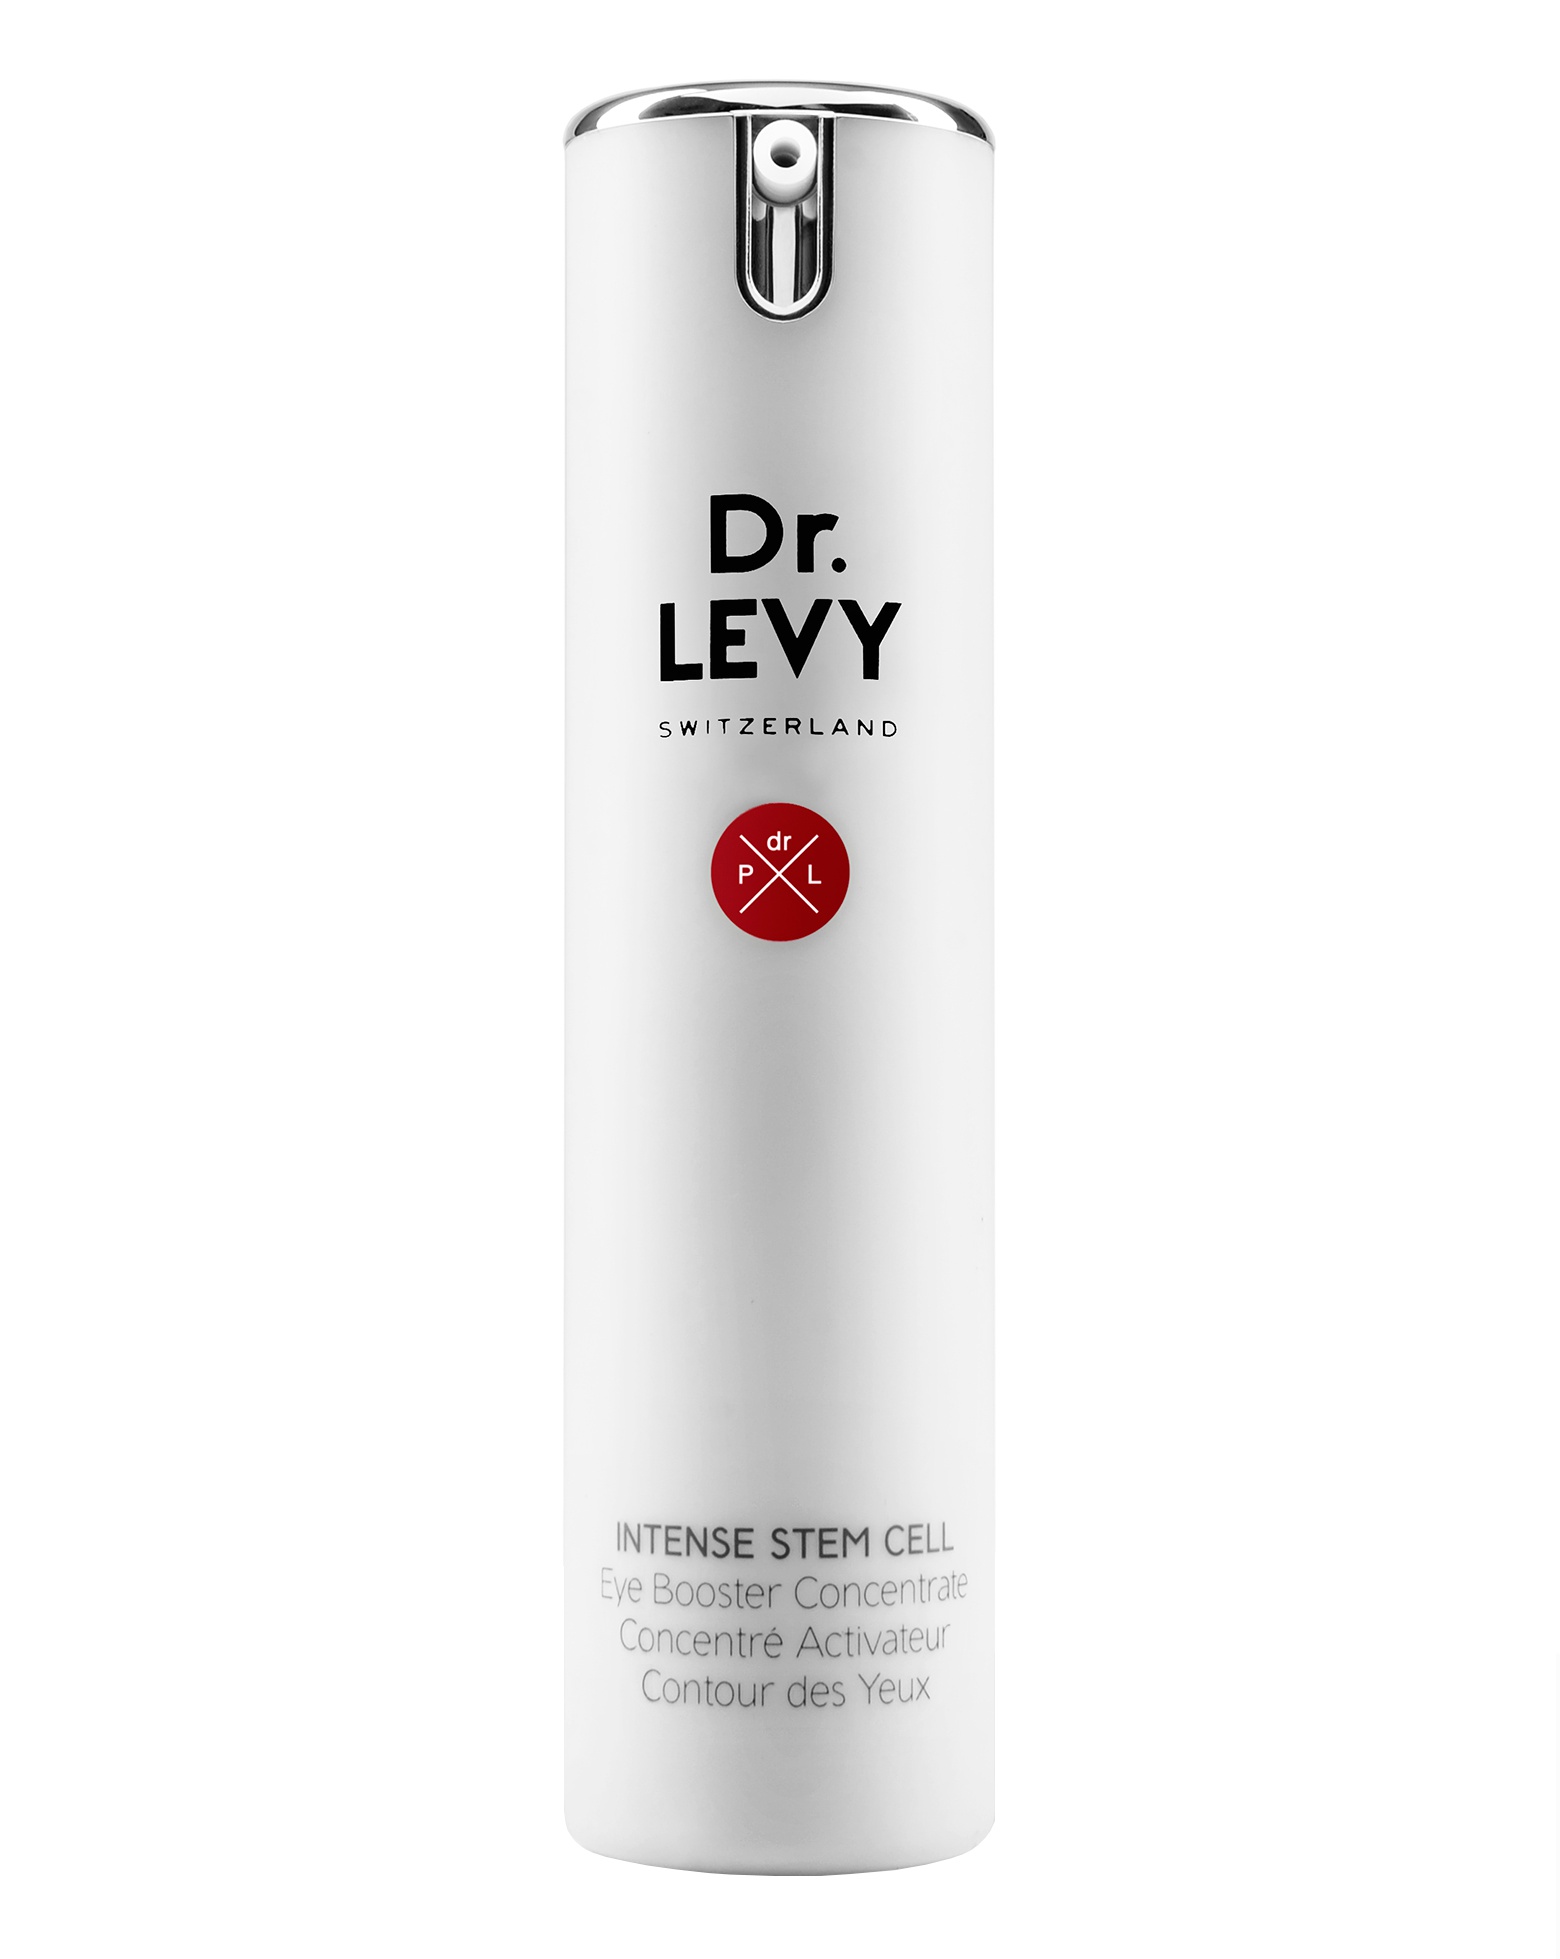 Dr. Levy Switzerland Intense Stem Cell Eye Booster Concentrate